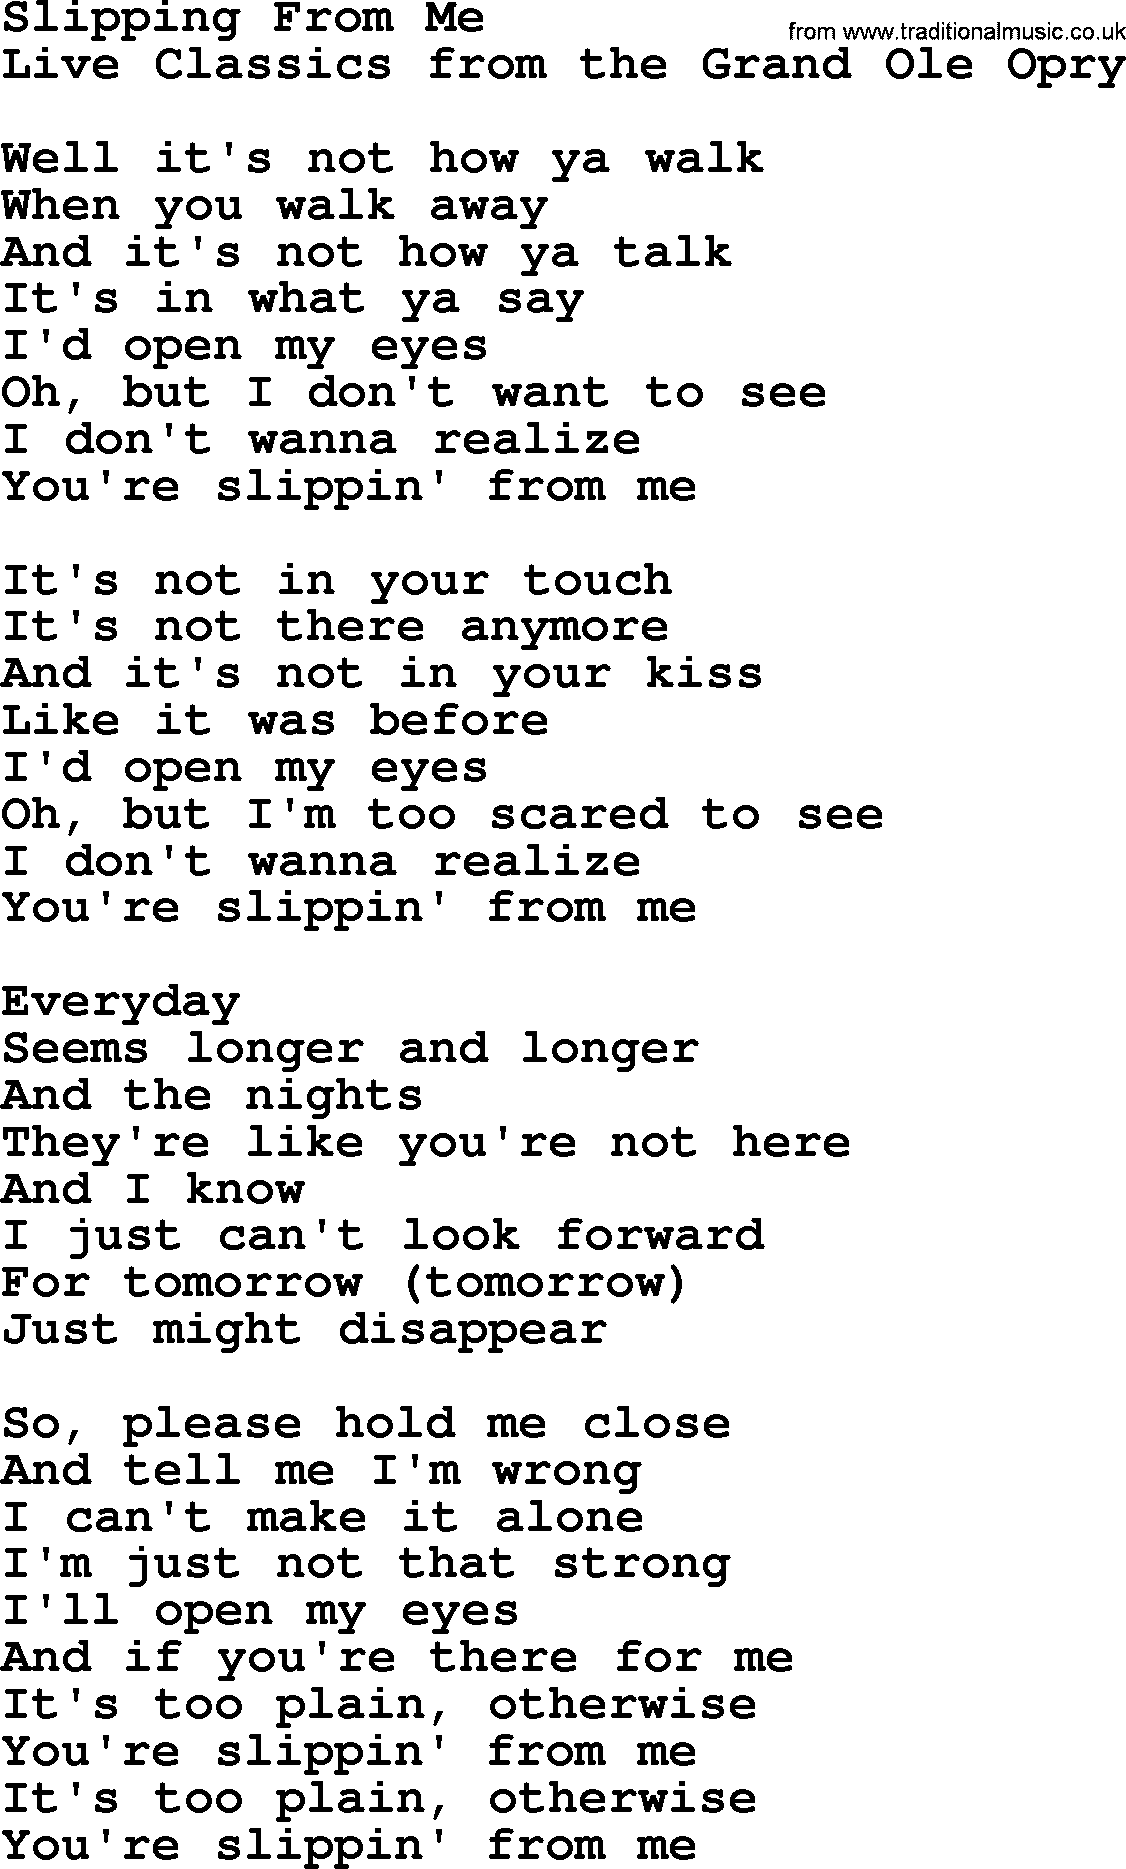 Slipping From Me, by Marty Robbins - lyrics